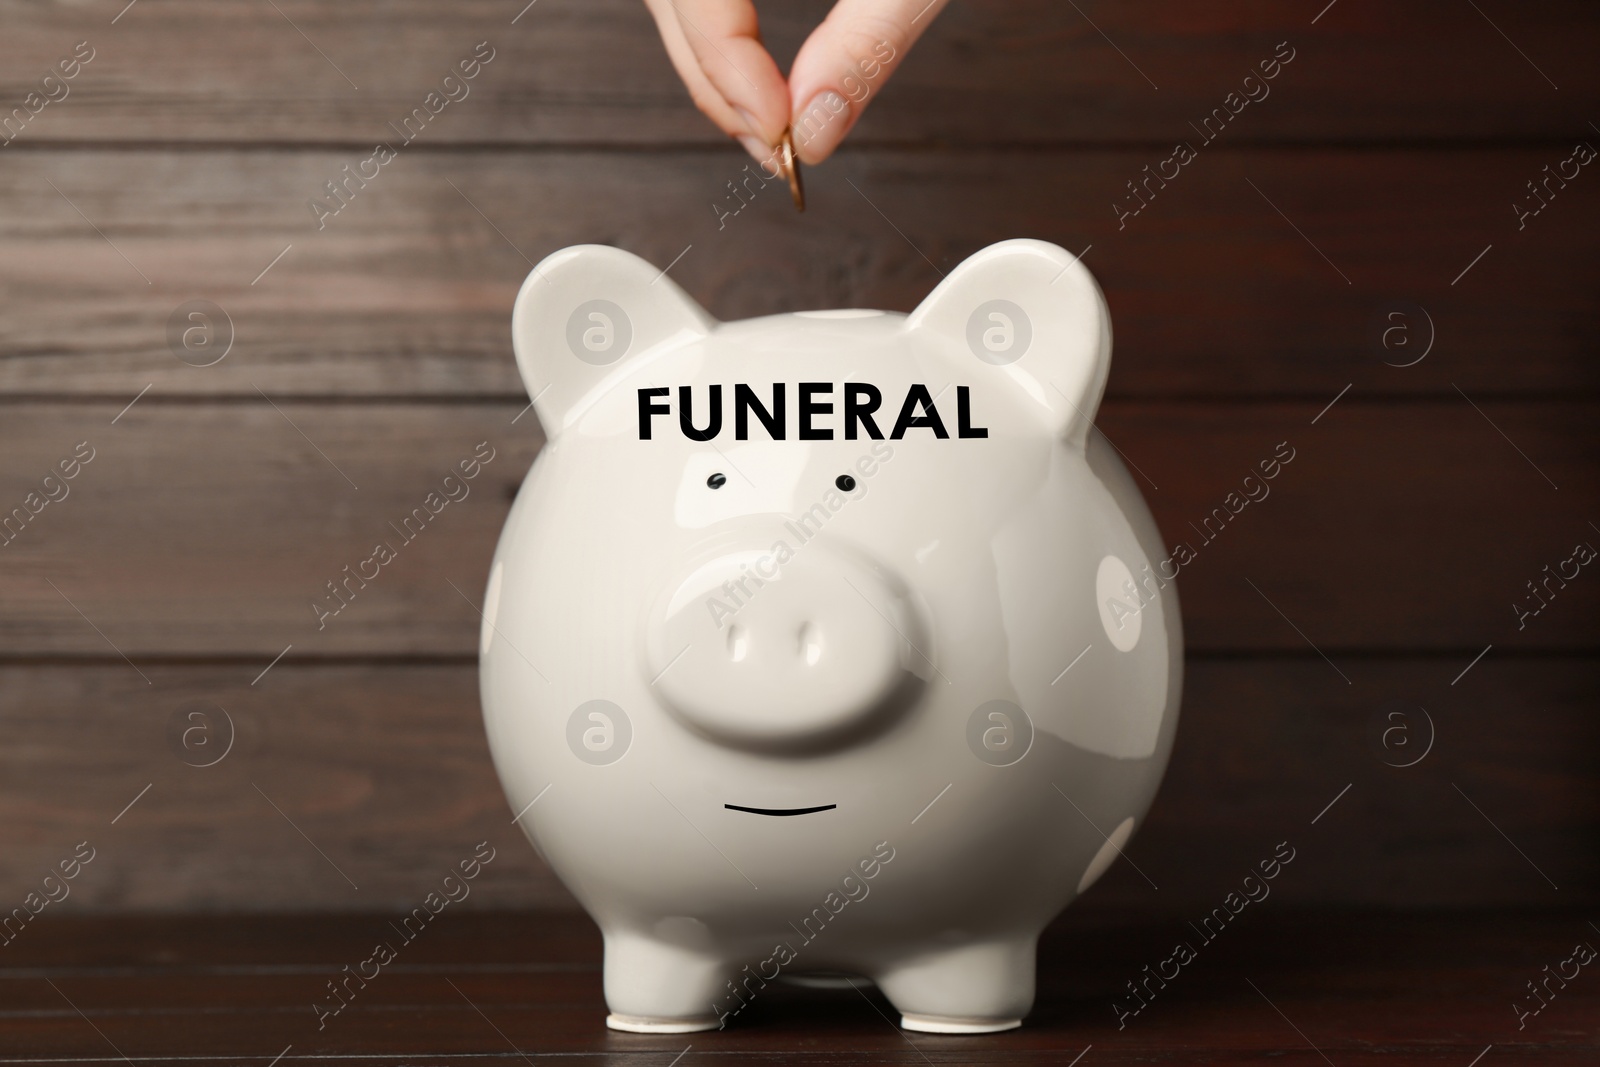 Image of Money for funeral expenses. Woman putting coin into white piggy bank at wooden table, closeup